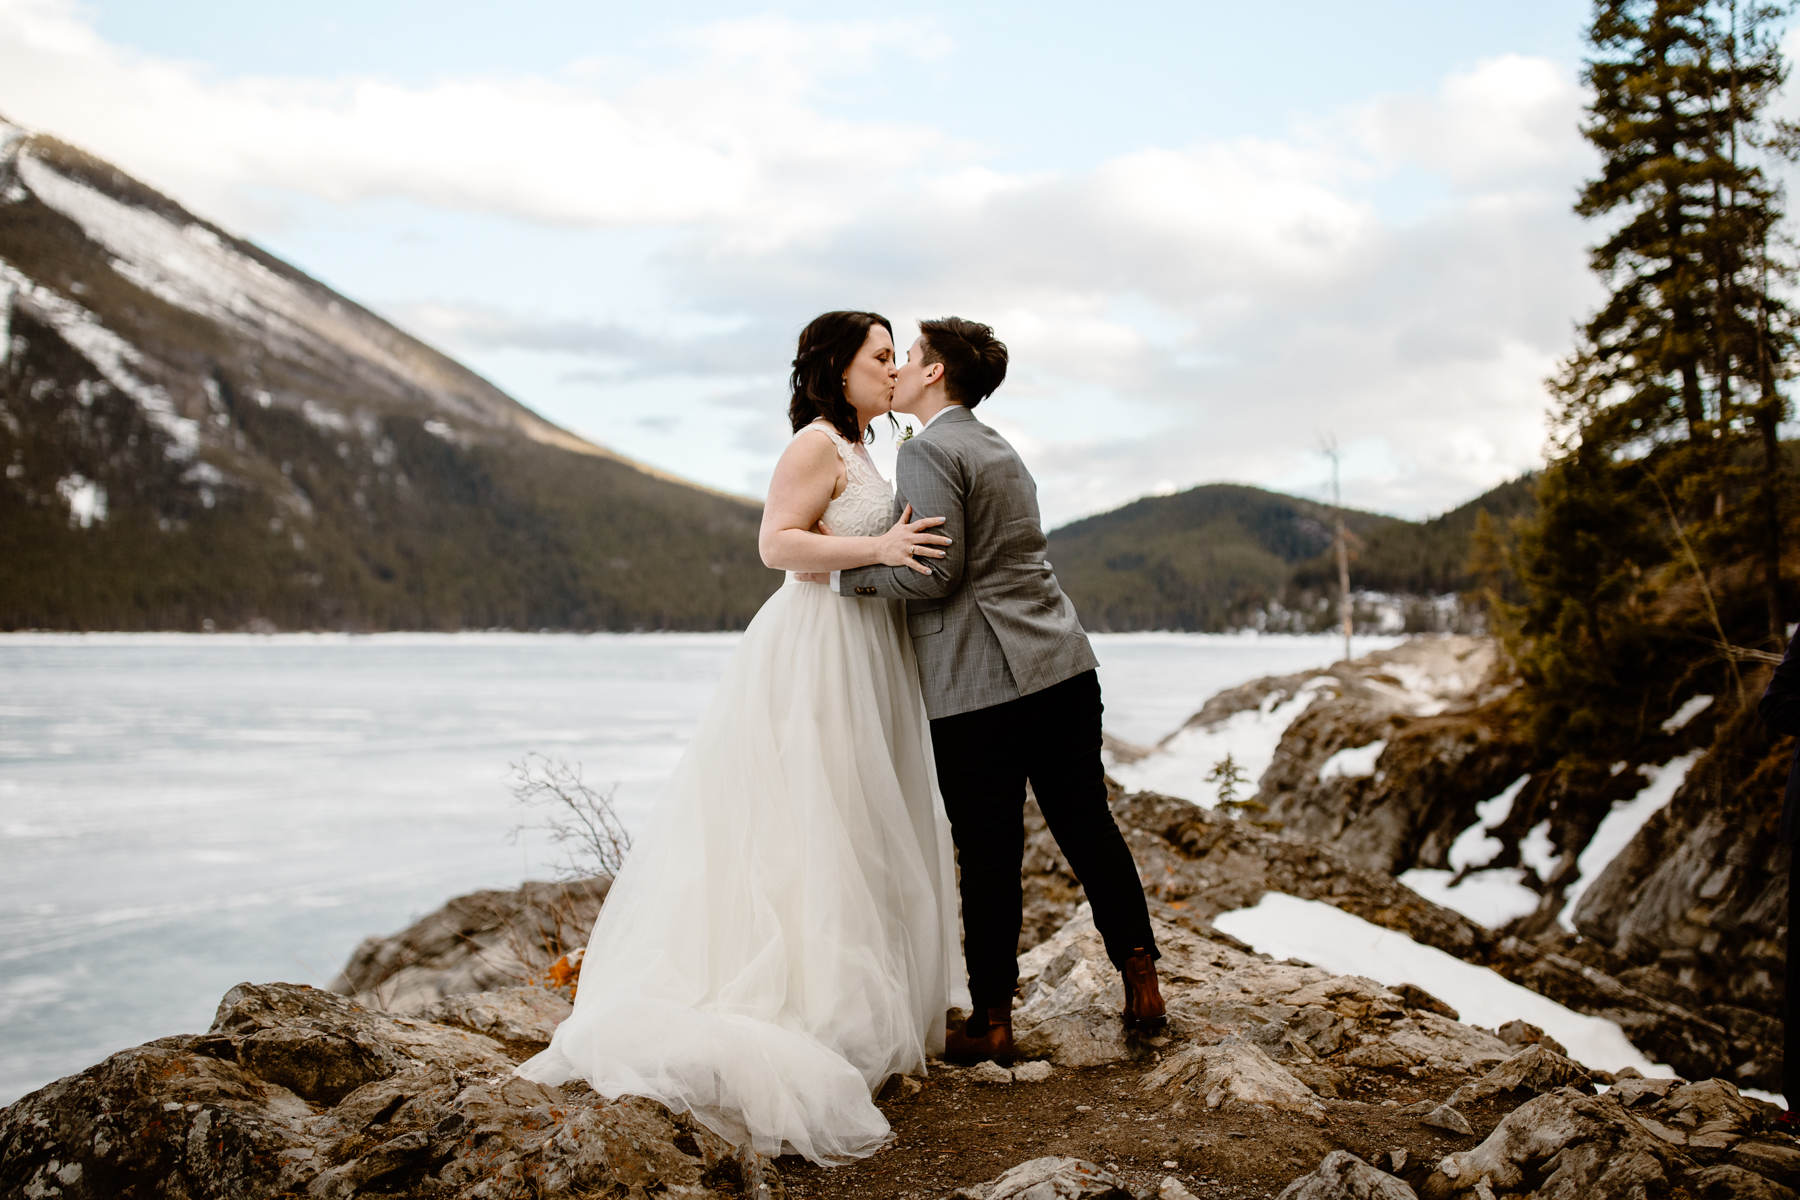 Banff National Park Elopement Photography with LGBTQ-friendly photographers - Image 22